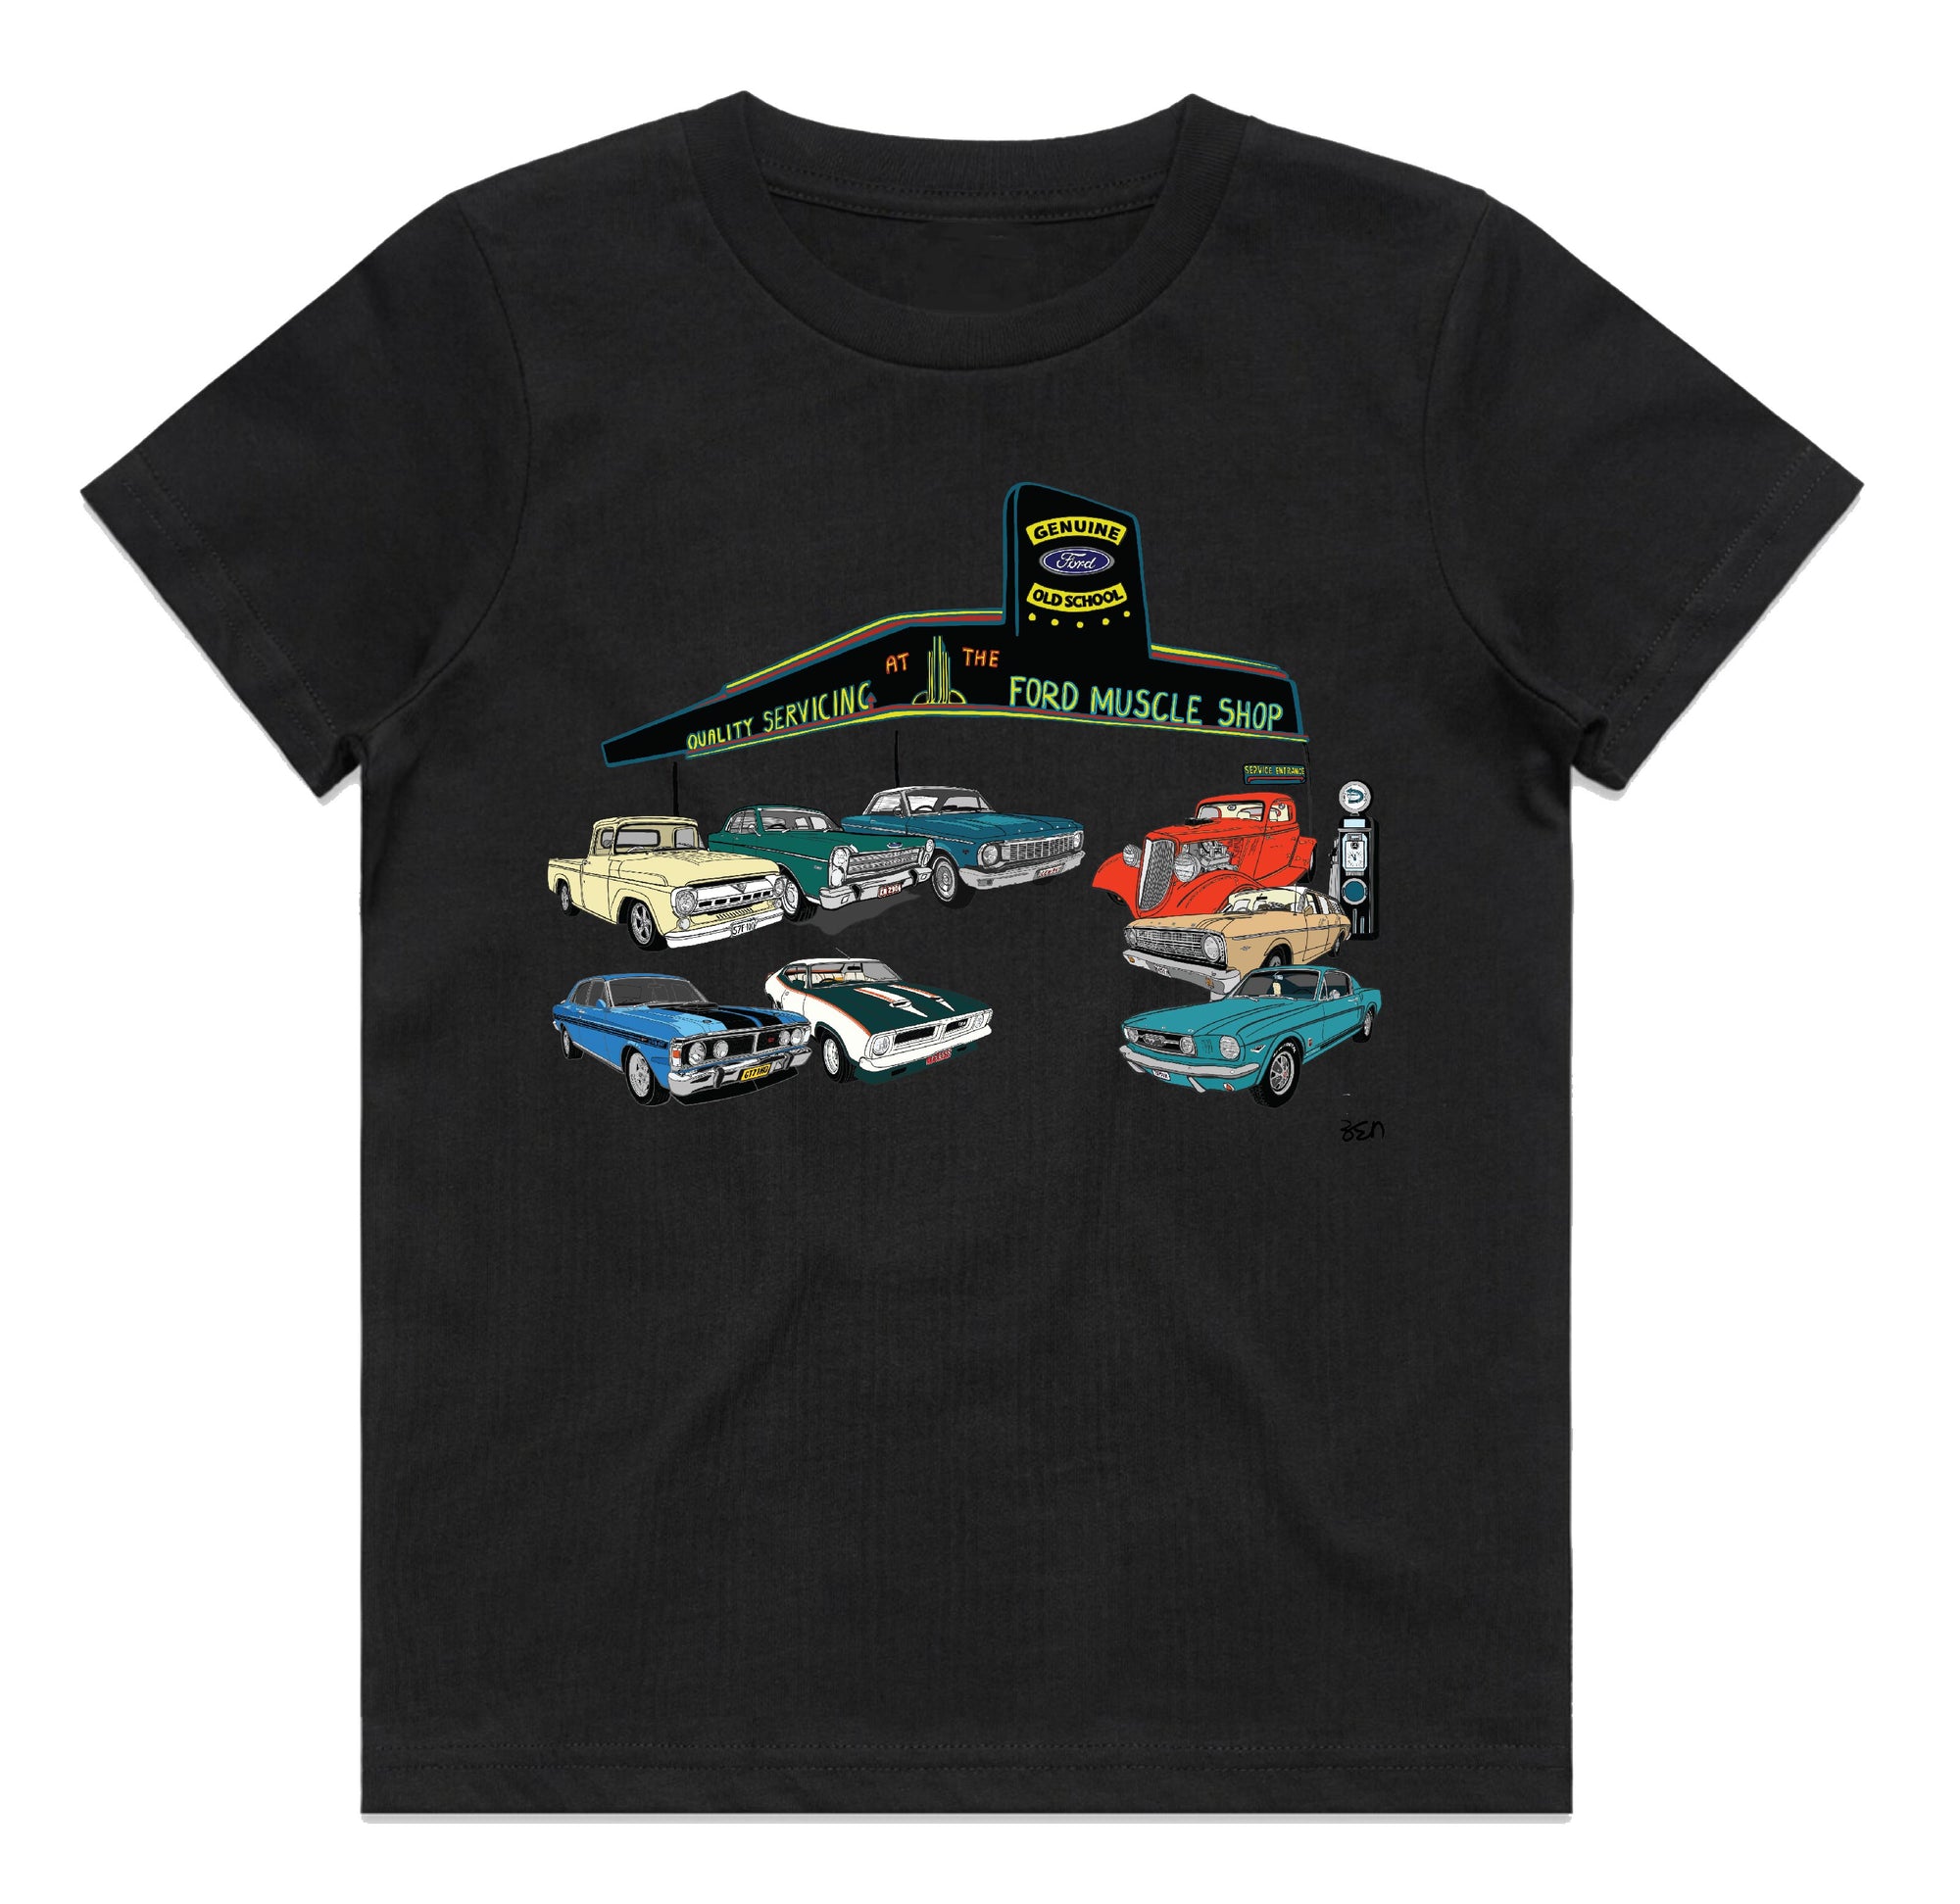 'THE FORD MUSCLE SHOP' OLD SCHOOL GARAGE KIDS TEE